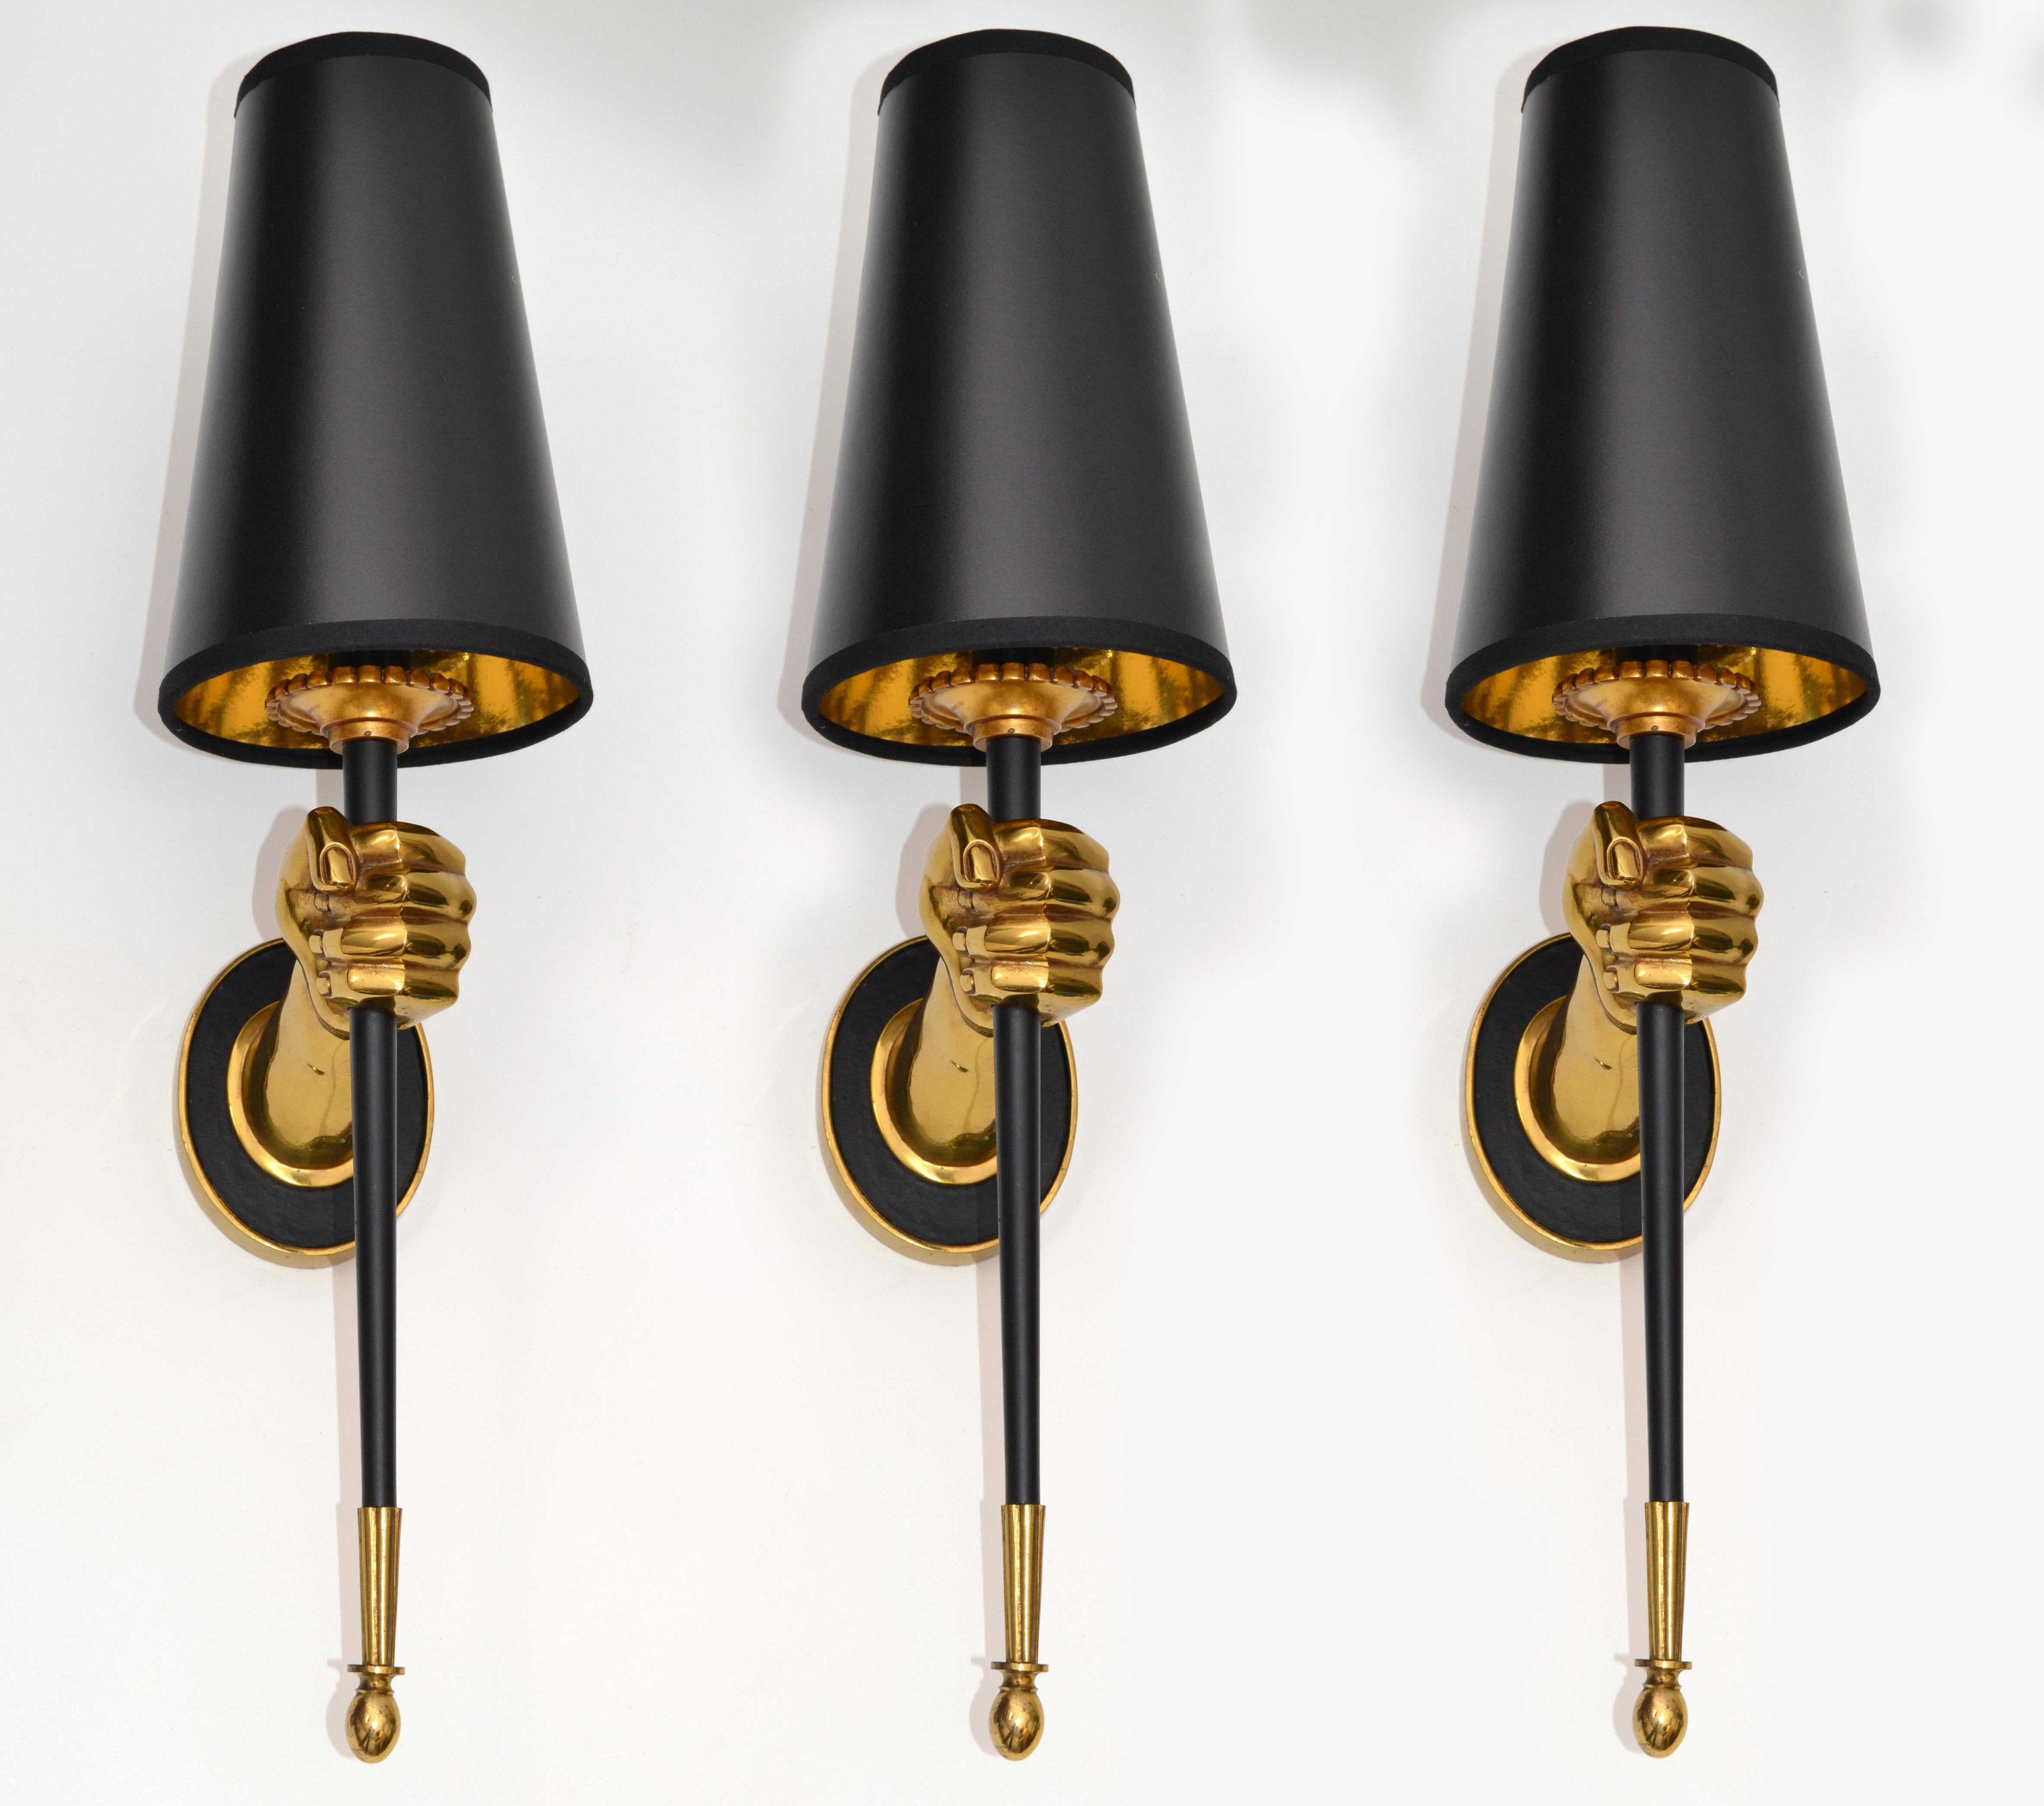 Impressive set 3 of sconces by Maison Jansen figuring a bronze hand holding a black lacquered torch.
One light, 60 watts max. US rewired.
Dimension without shade: 14 inches height, 3 1/4 inches width, 6 inches depth.
Projection back plate 4.5 H,